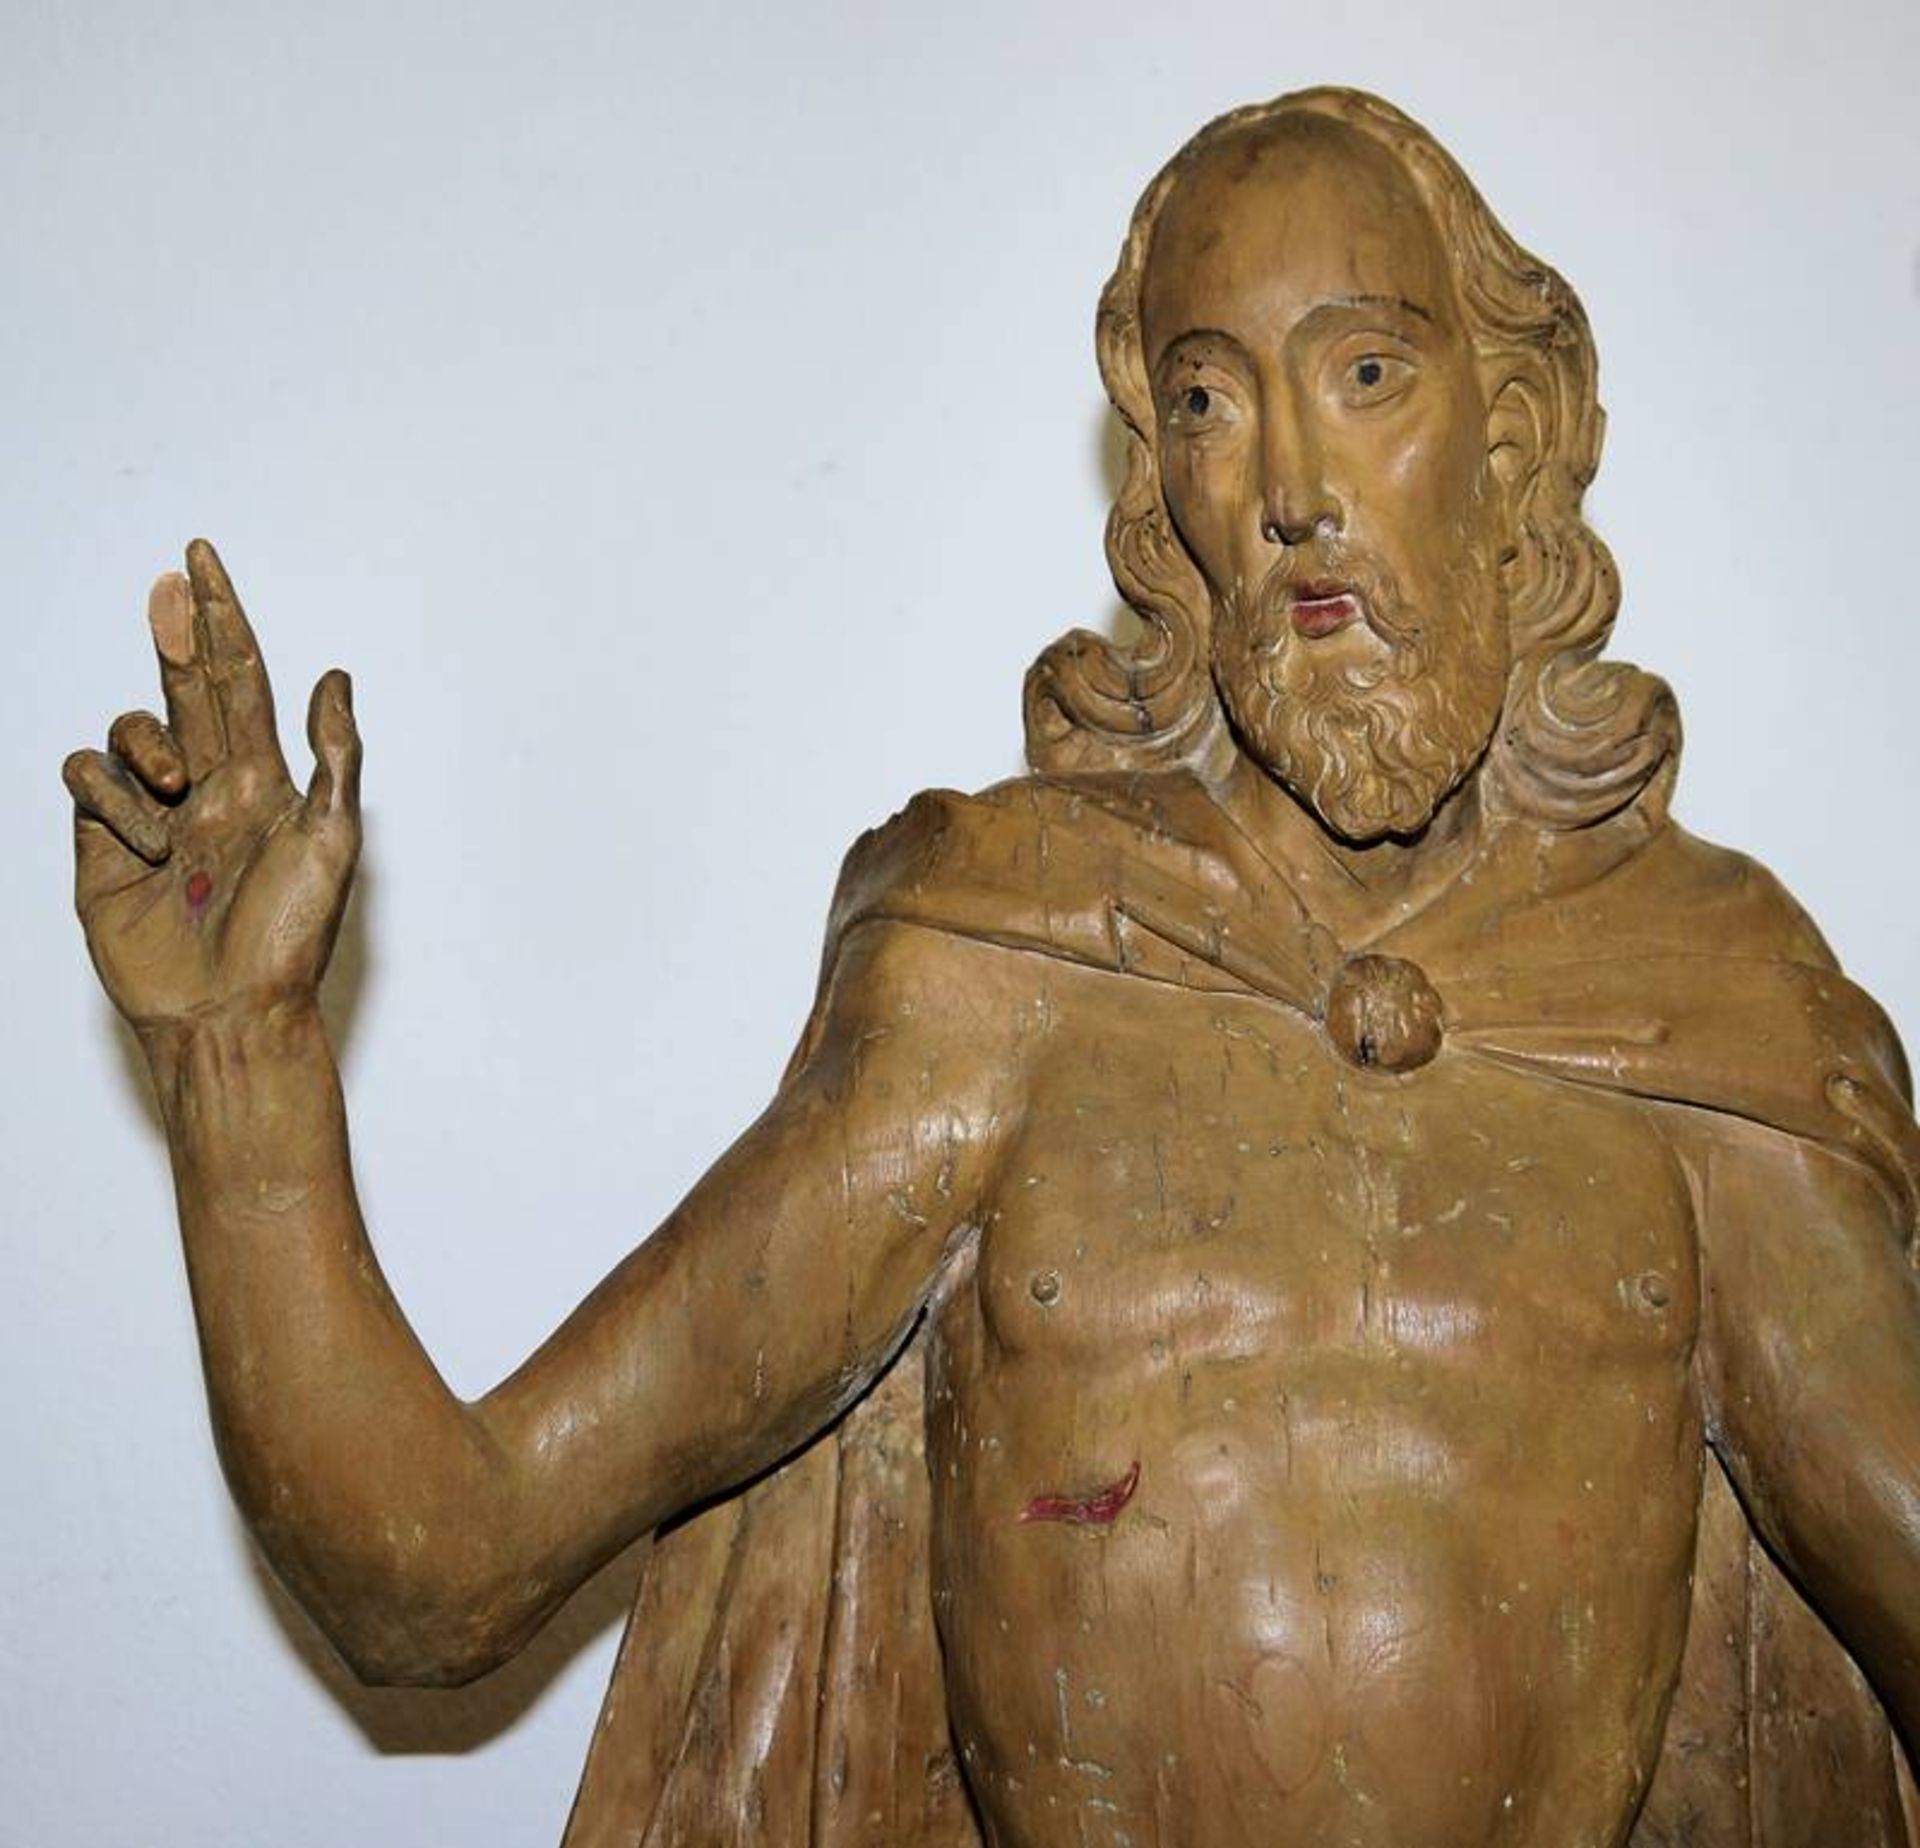 Frankish Master of the 16th century, Blessing Christ, limewood sculpture with additions - Image 2 of 3